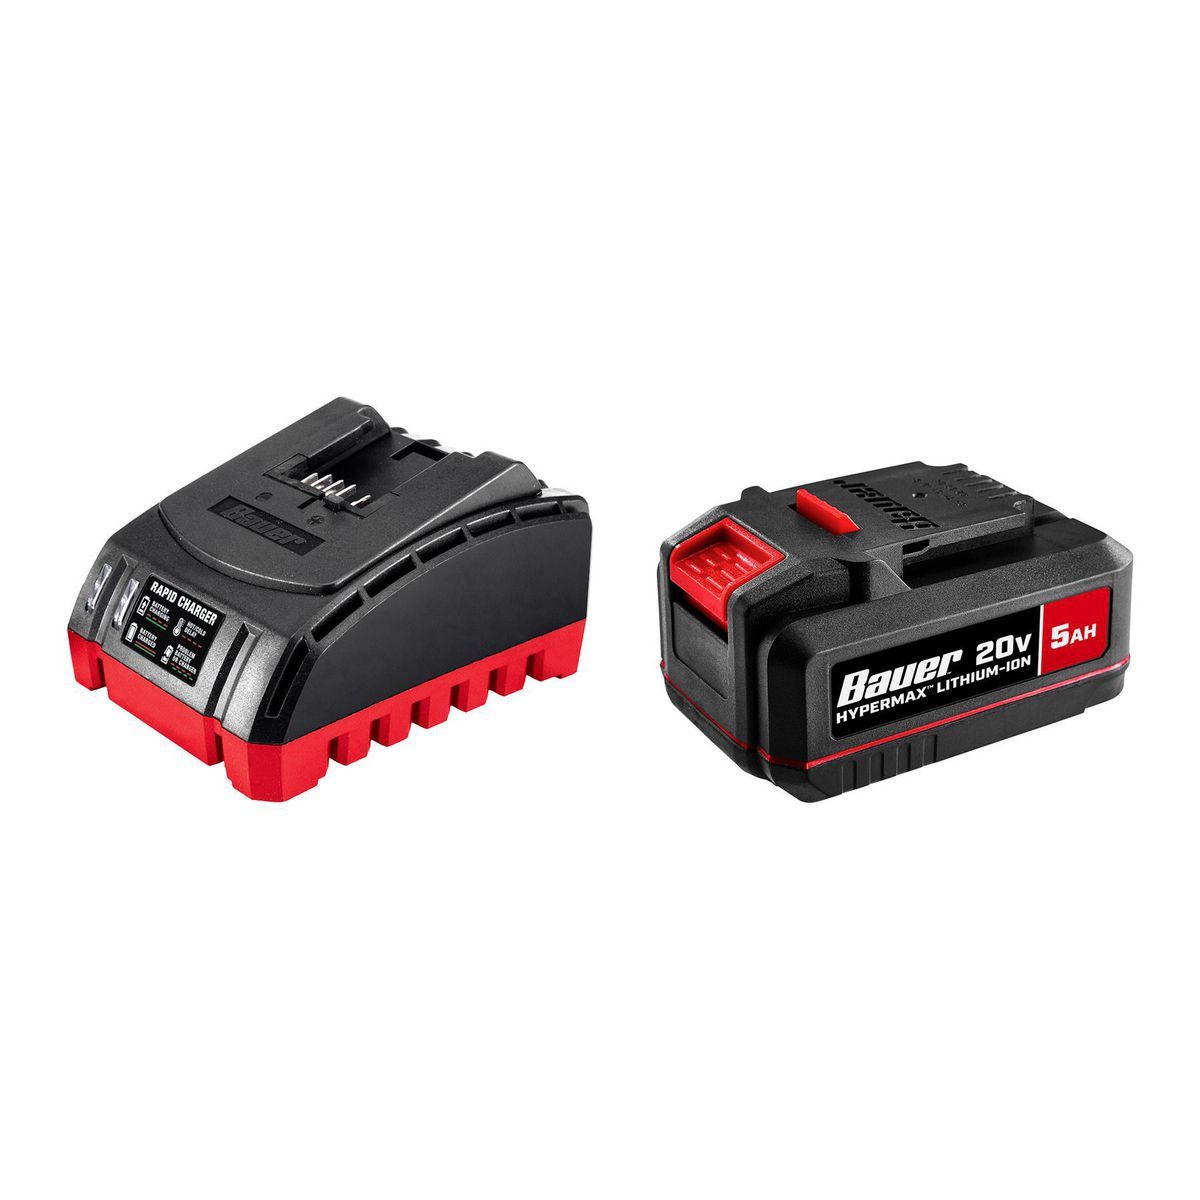 Harbor Freight in store only, Bauer 5AH battery + charger + tool, $89.99, Hercules 5AH battery + charger + tool, $99.99